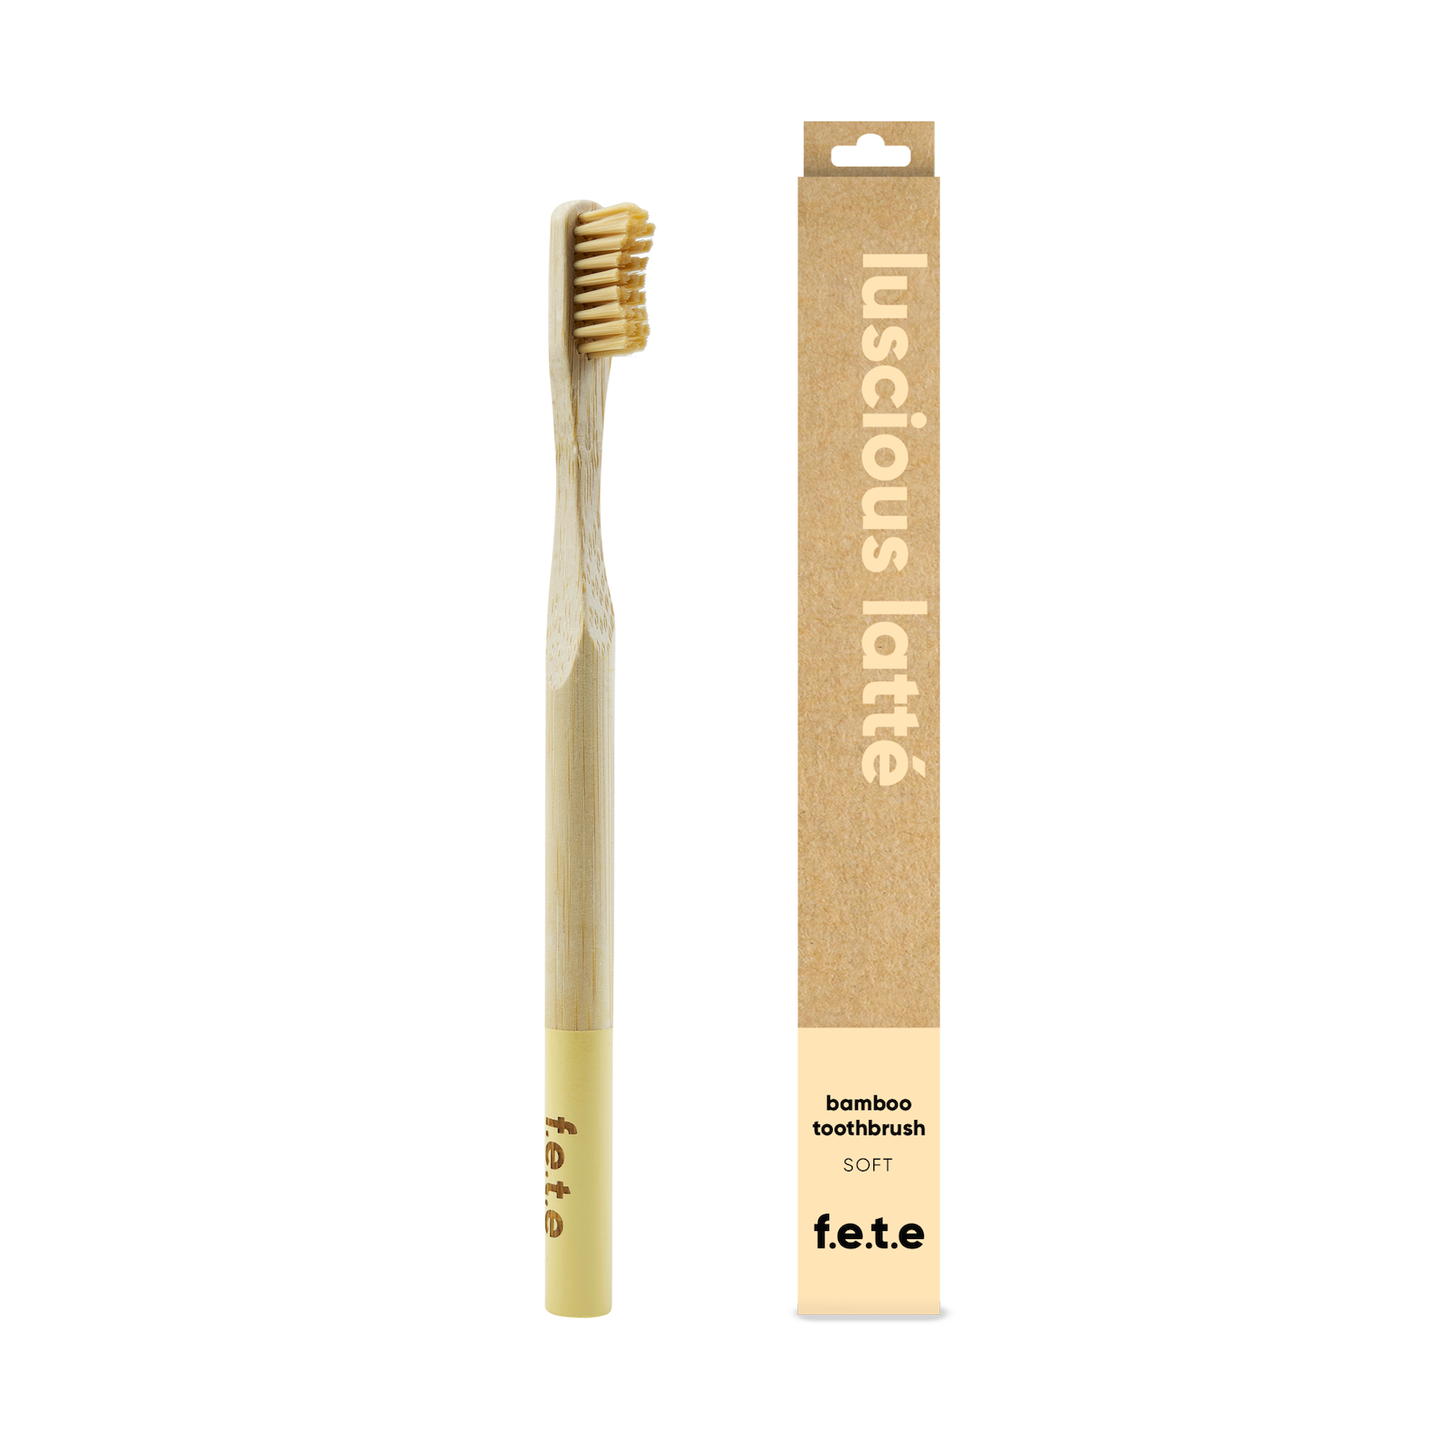 Adult's Soft Bamboo Toothbrush - Luscious Latte